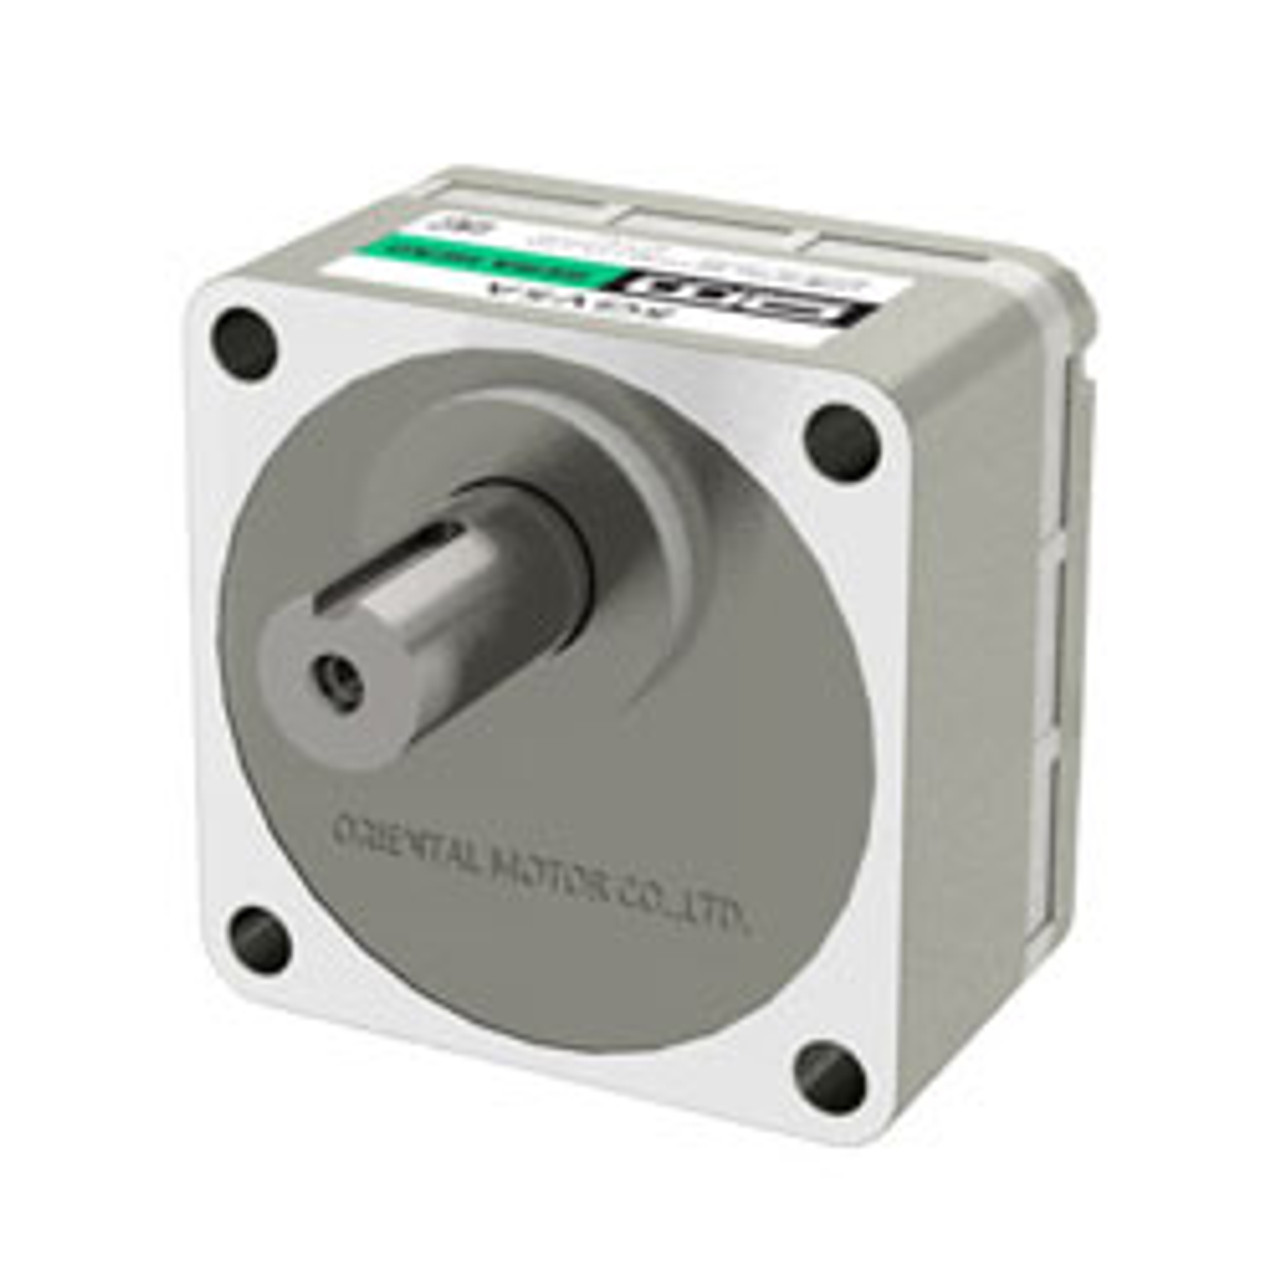 5GVR120BS - Product Image